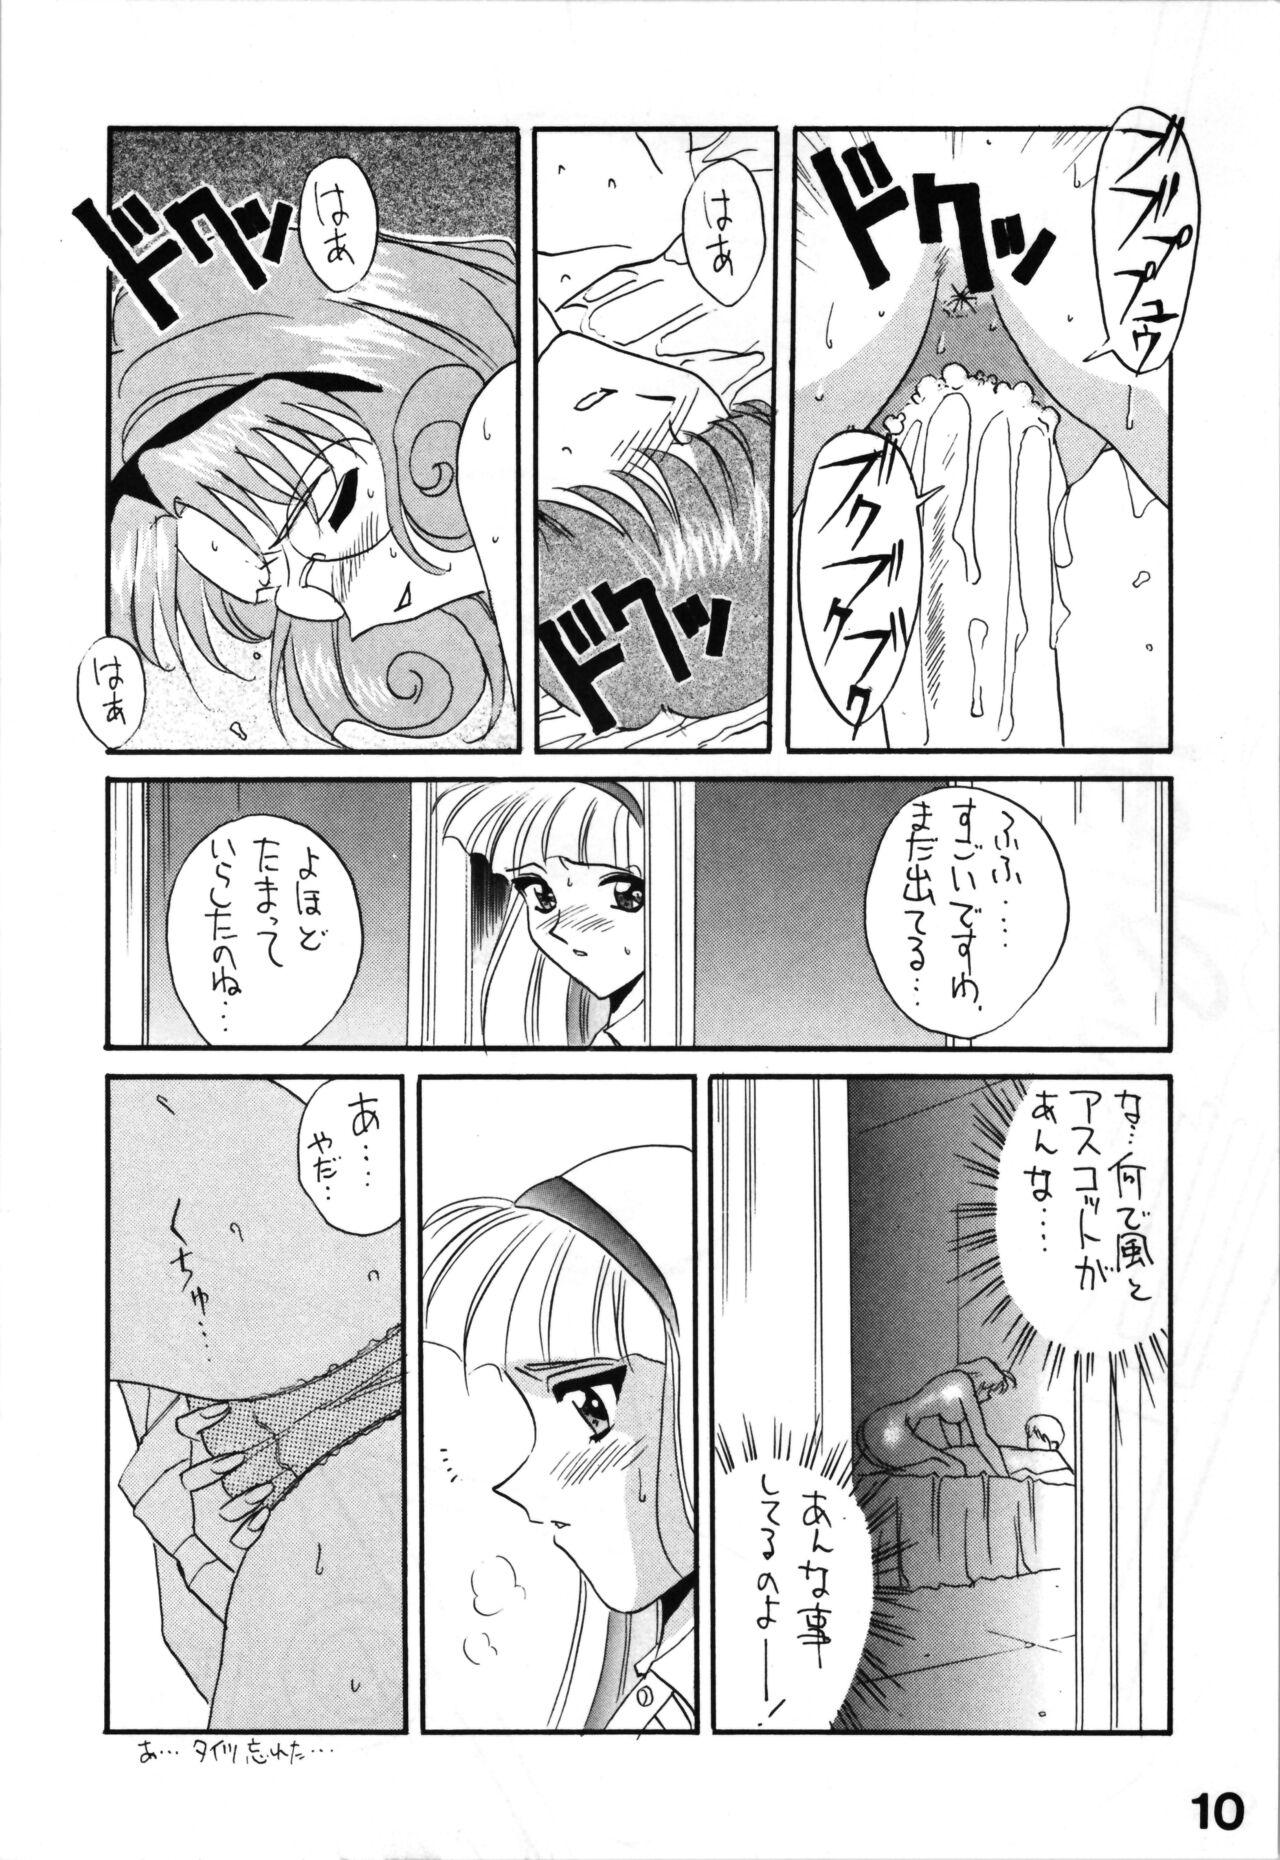 Belly HB vol.3 - Magic knight rayearth Toys - Page 10